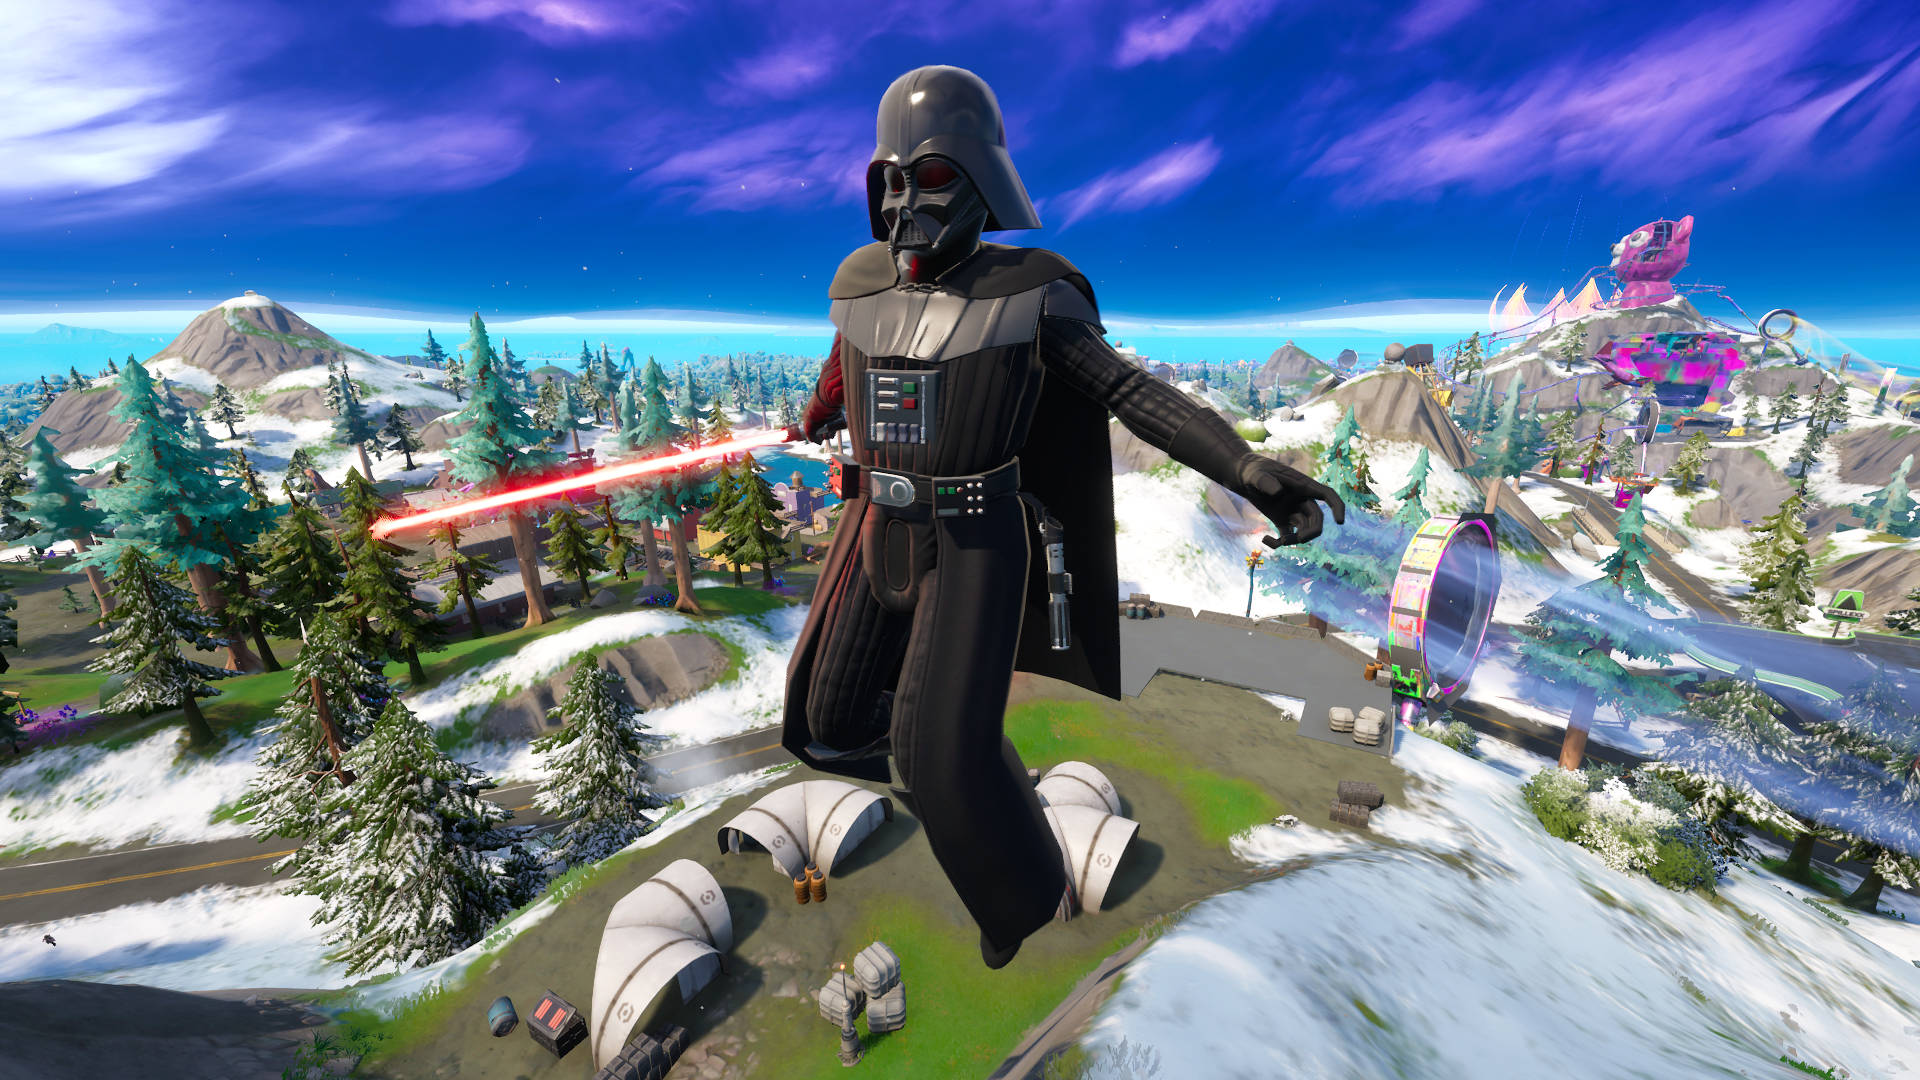 How to defeat Darth Vader in Fortnite